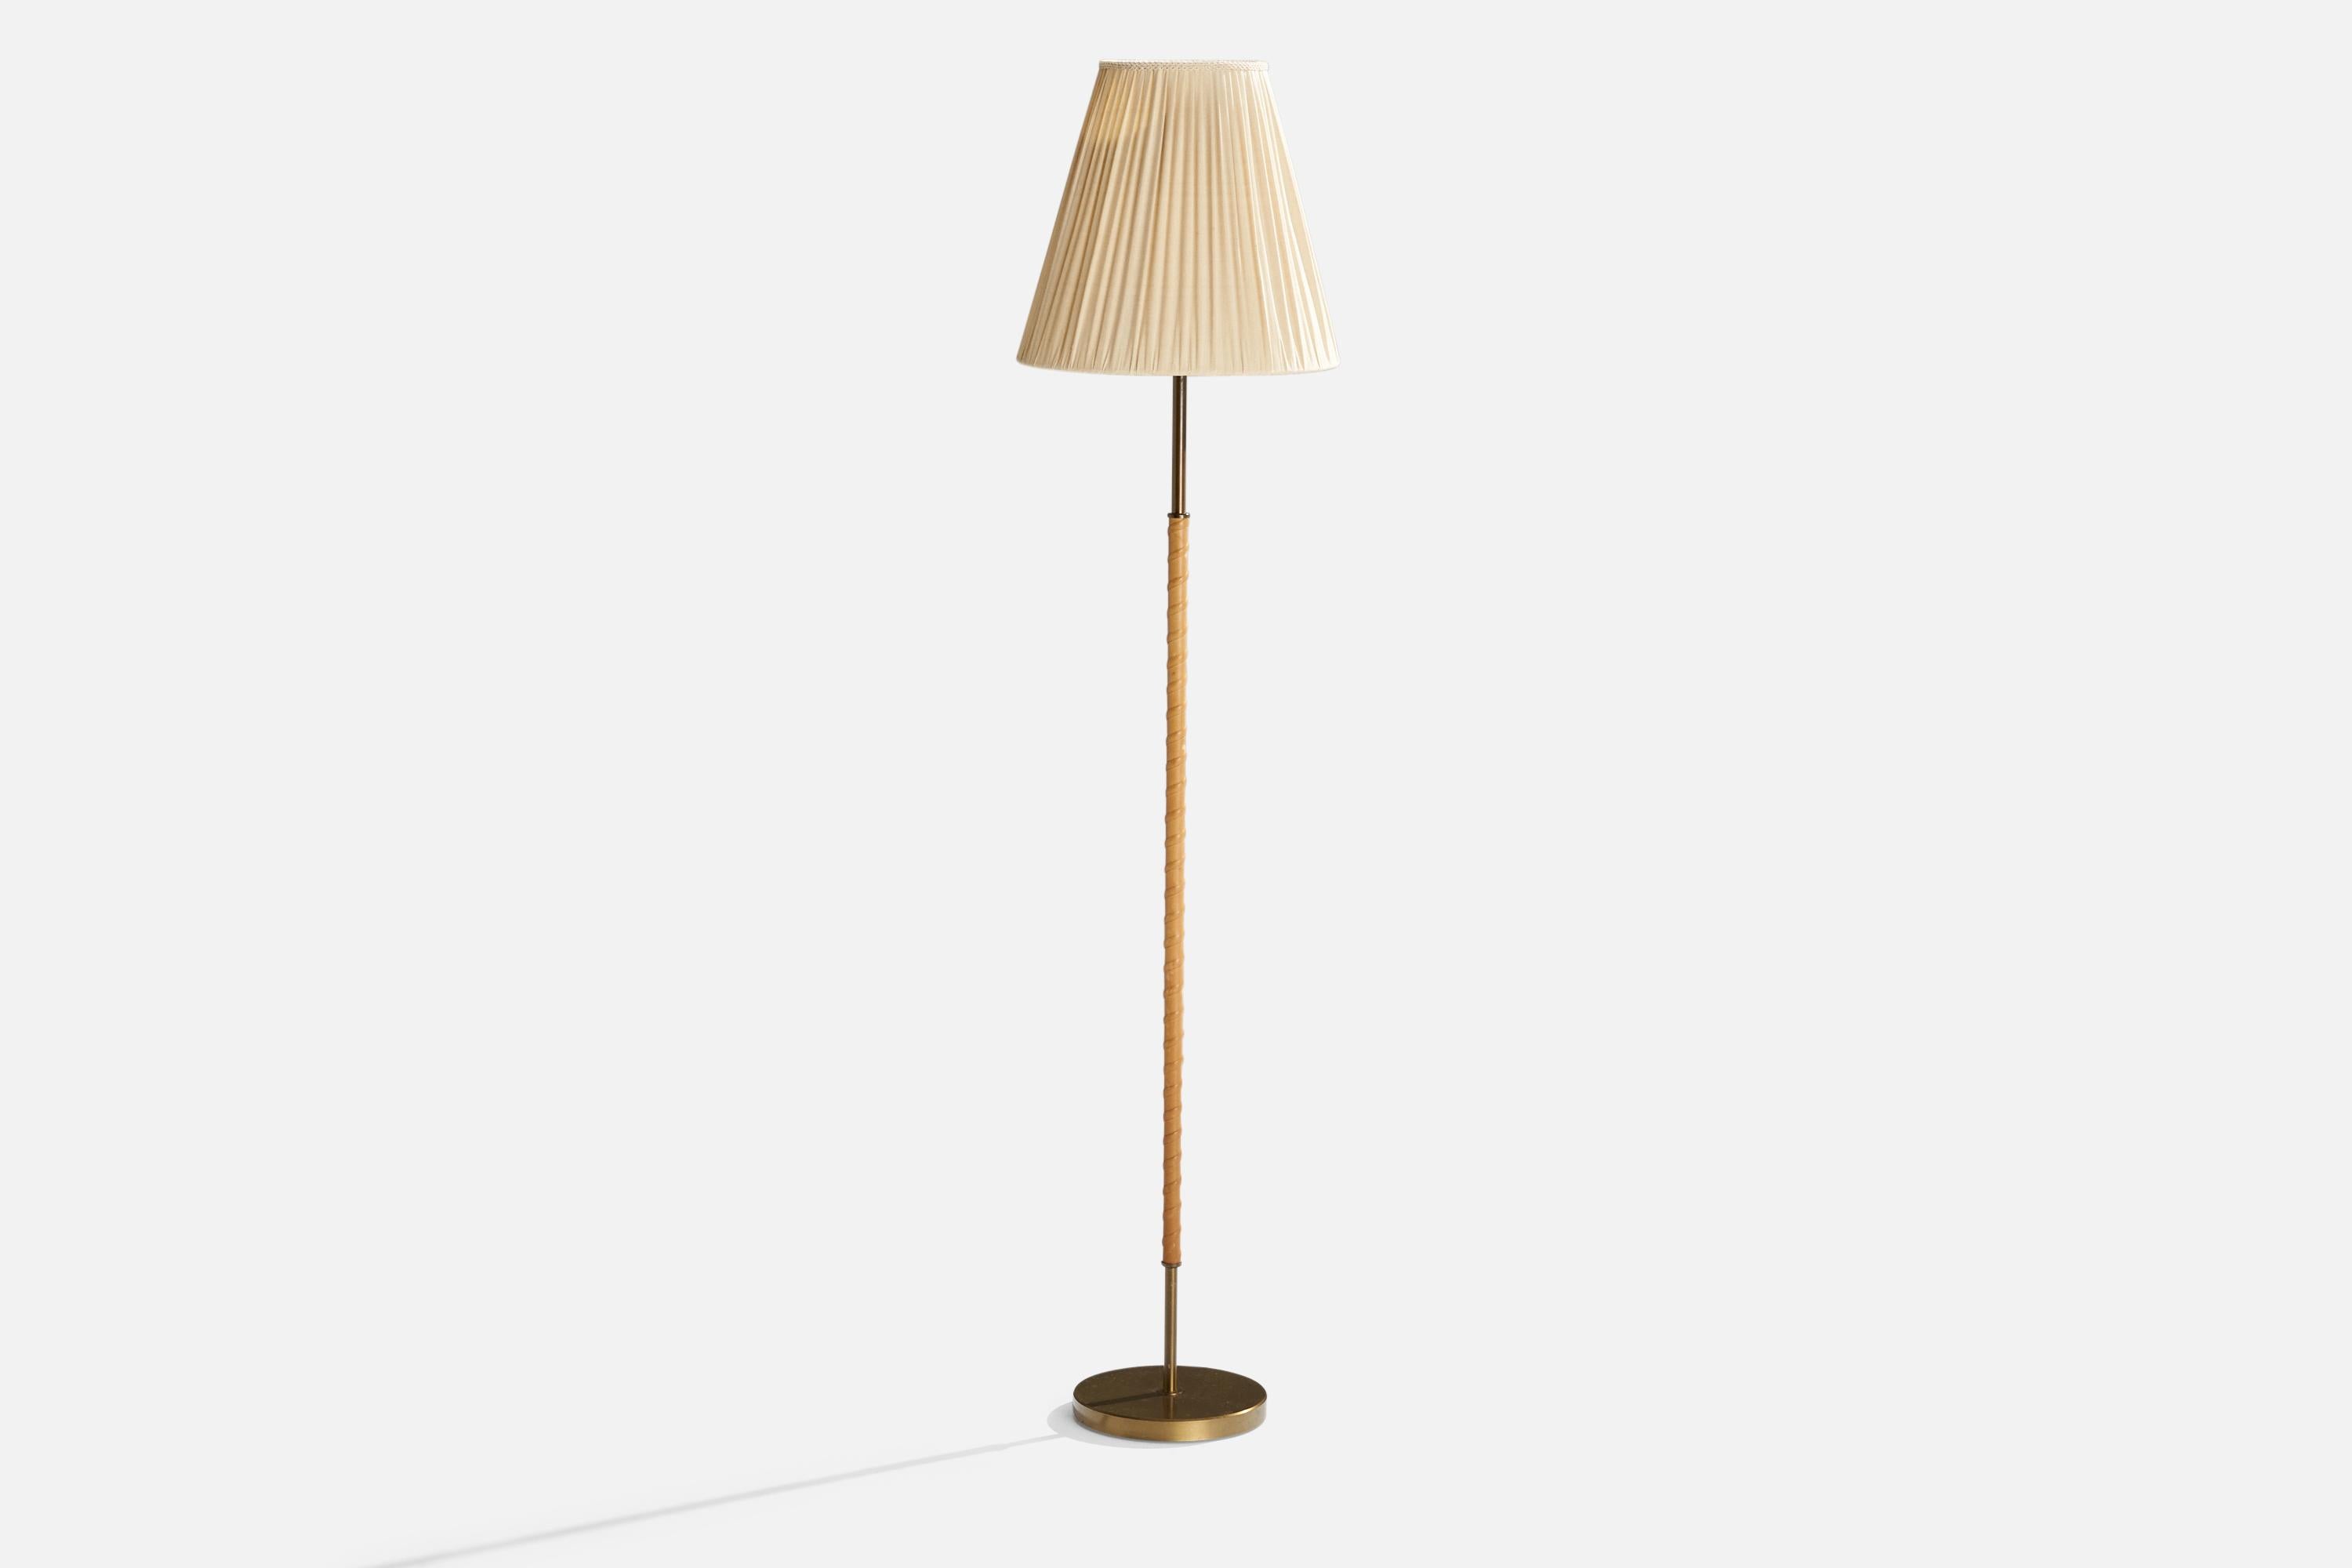 A brass, leather and light beige fabric floor lamp designed by Harald Notini and produced by Böhlmarks, Sweden, 1940s.

Overall Dimensions (inches):62.25” H x 14” W x 16.25” D
Stated dimensions include shade.
Bulb Specifications: E-26 Bulb
Number of